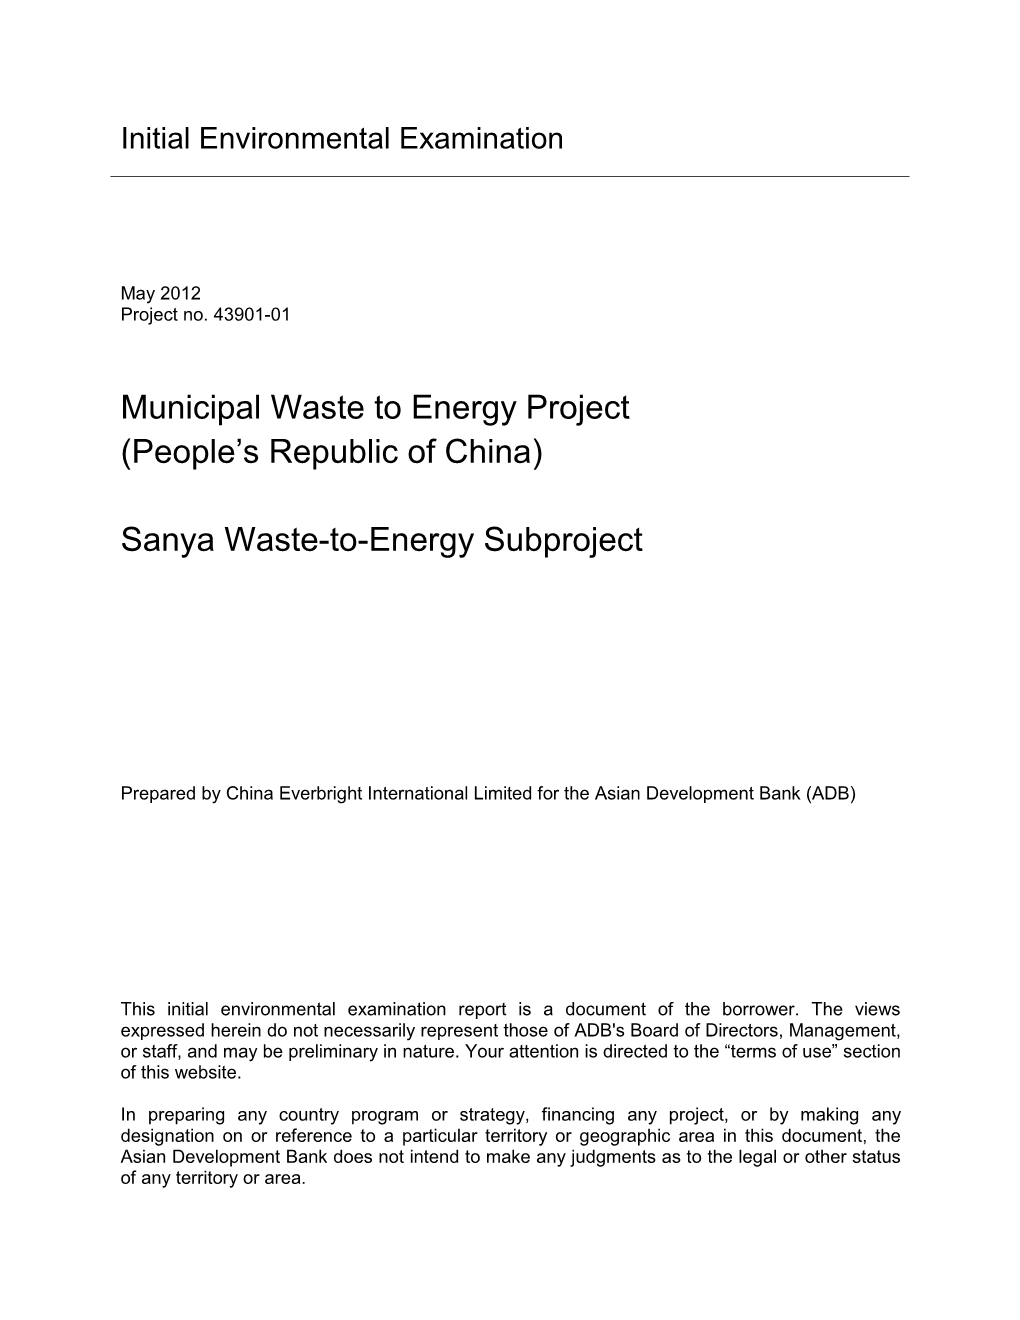 43901-014: Sanya Waste-To-Energy Subproject Initial Environmental